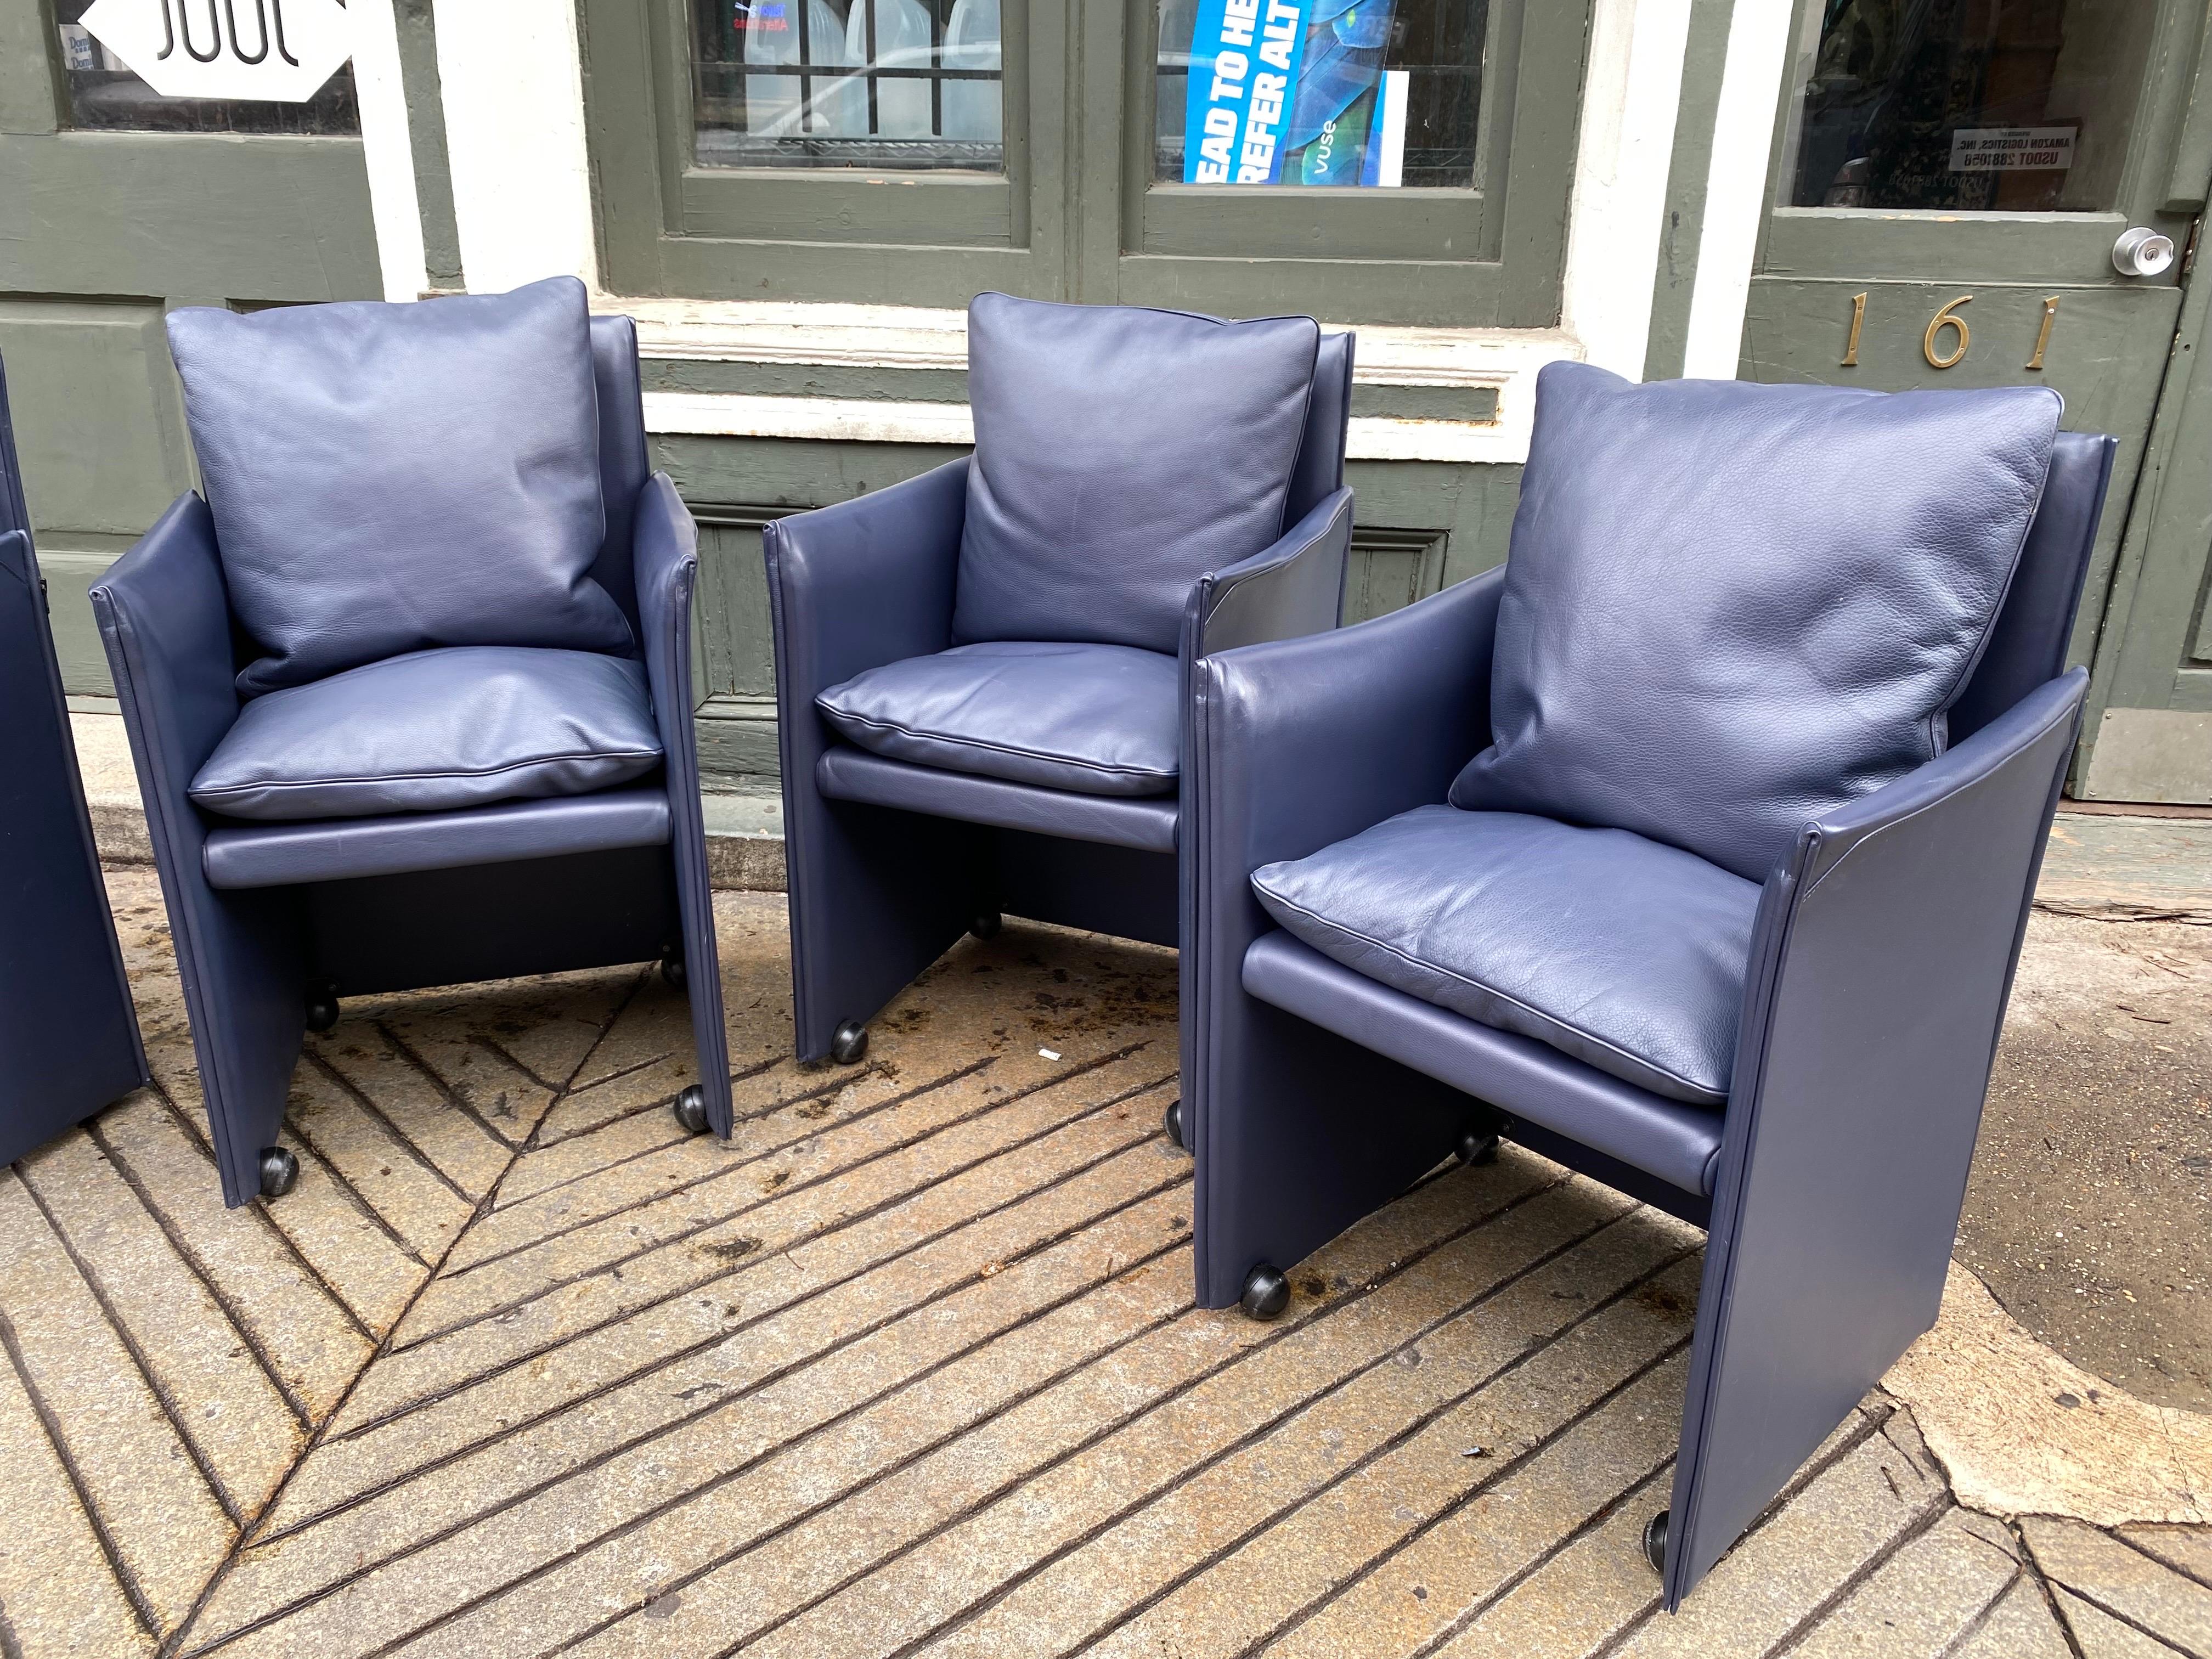 Set of 6 Mario Bellini Break Armchairs in a top grain dark blue leather. Down-filled cushions add style and comfort to these chairs! 2 Additional armless models available as well! Chairs roll easily and still have their back cushions as seen in